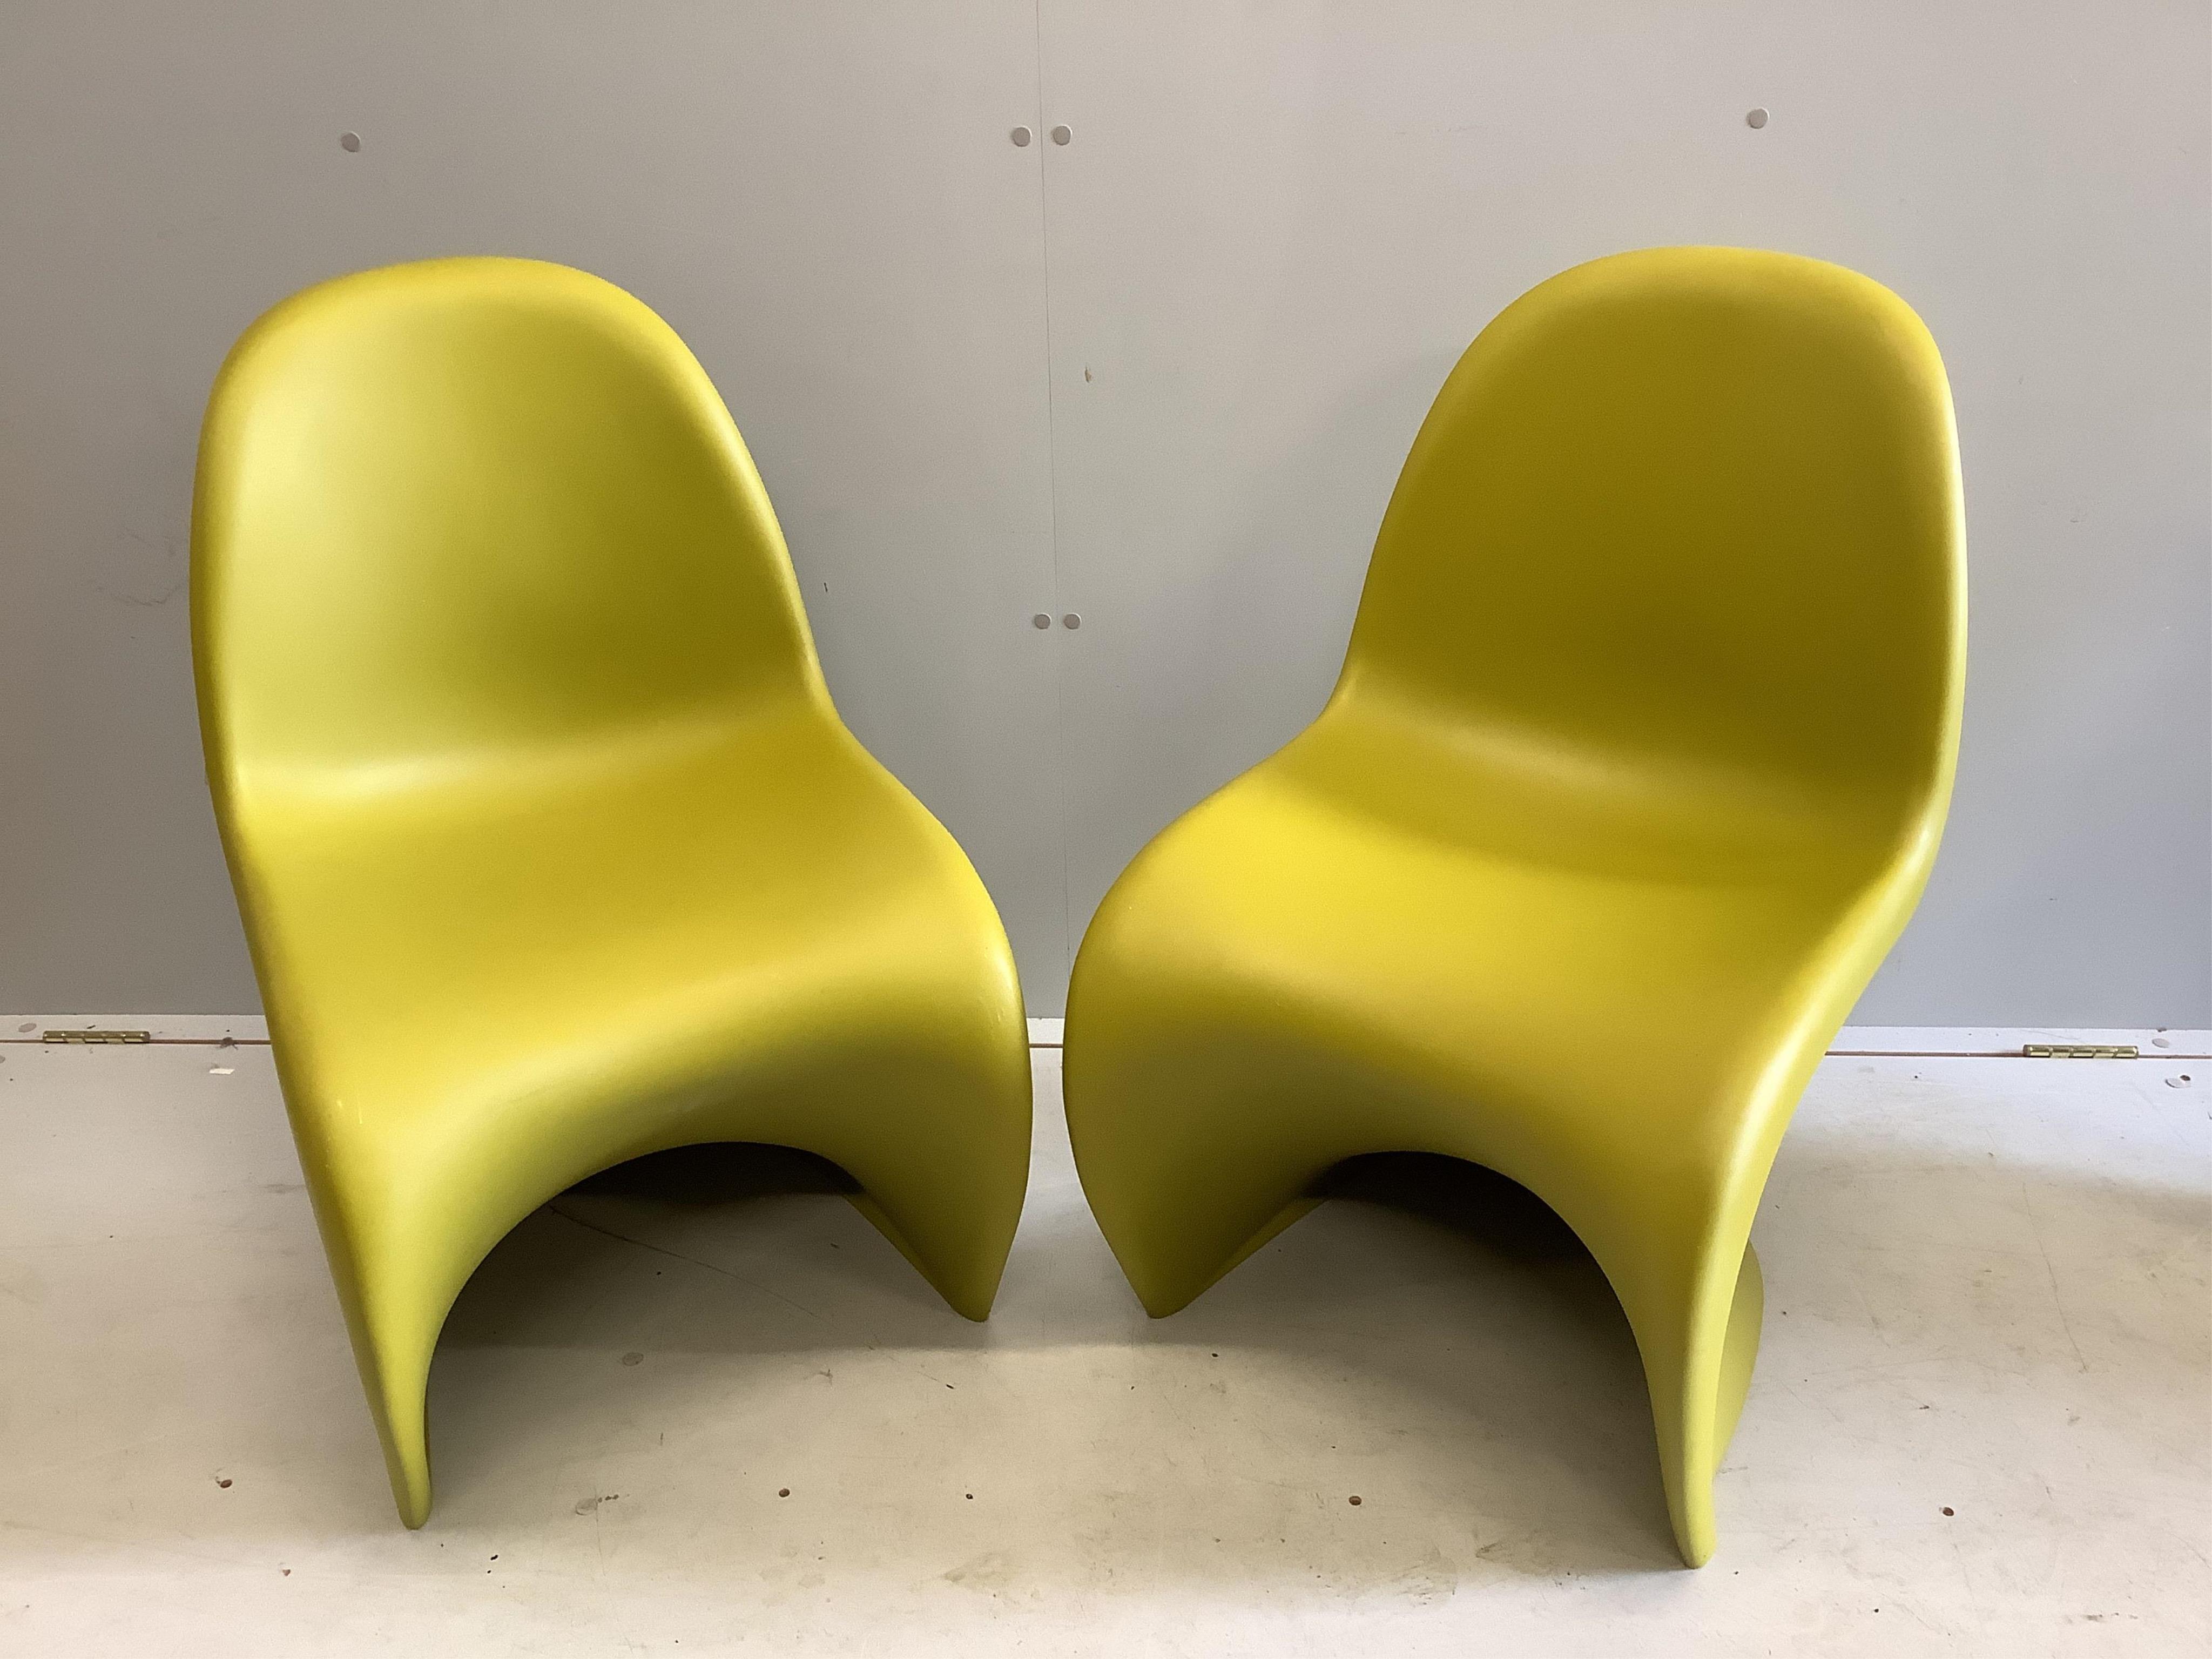 Two moulded plastic chairs by Verner Panton for Vitra, width 48cm, depth 58cm, height 82cm